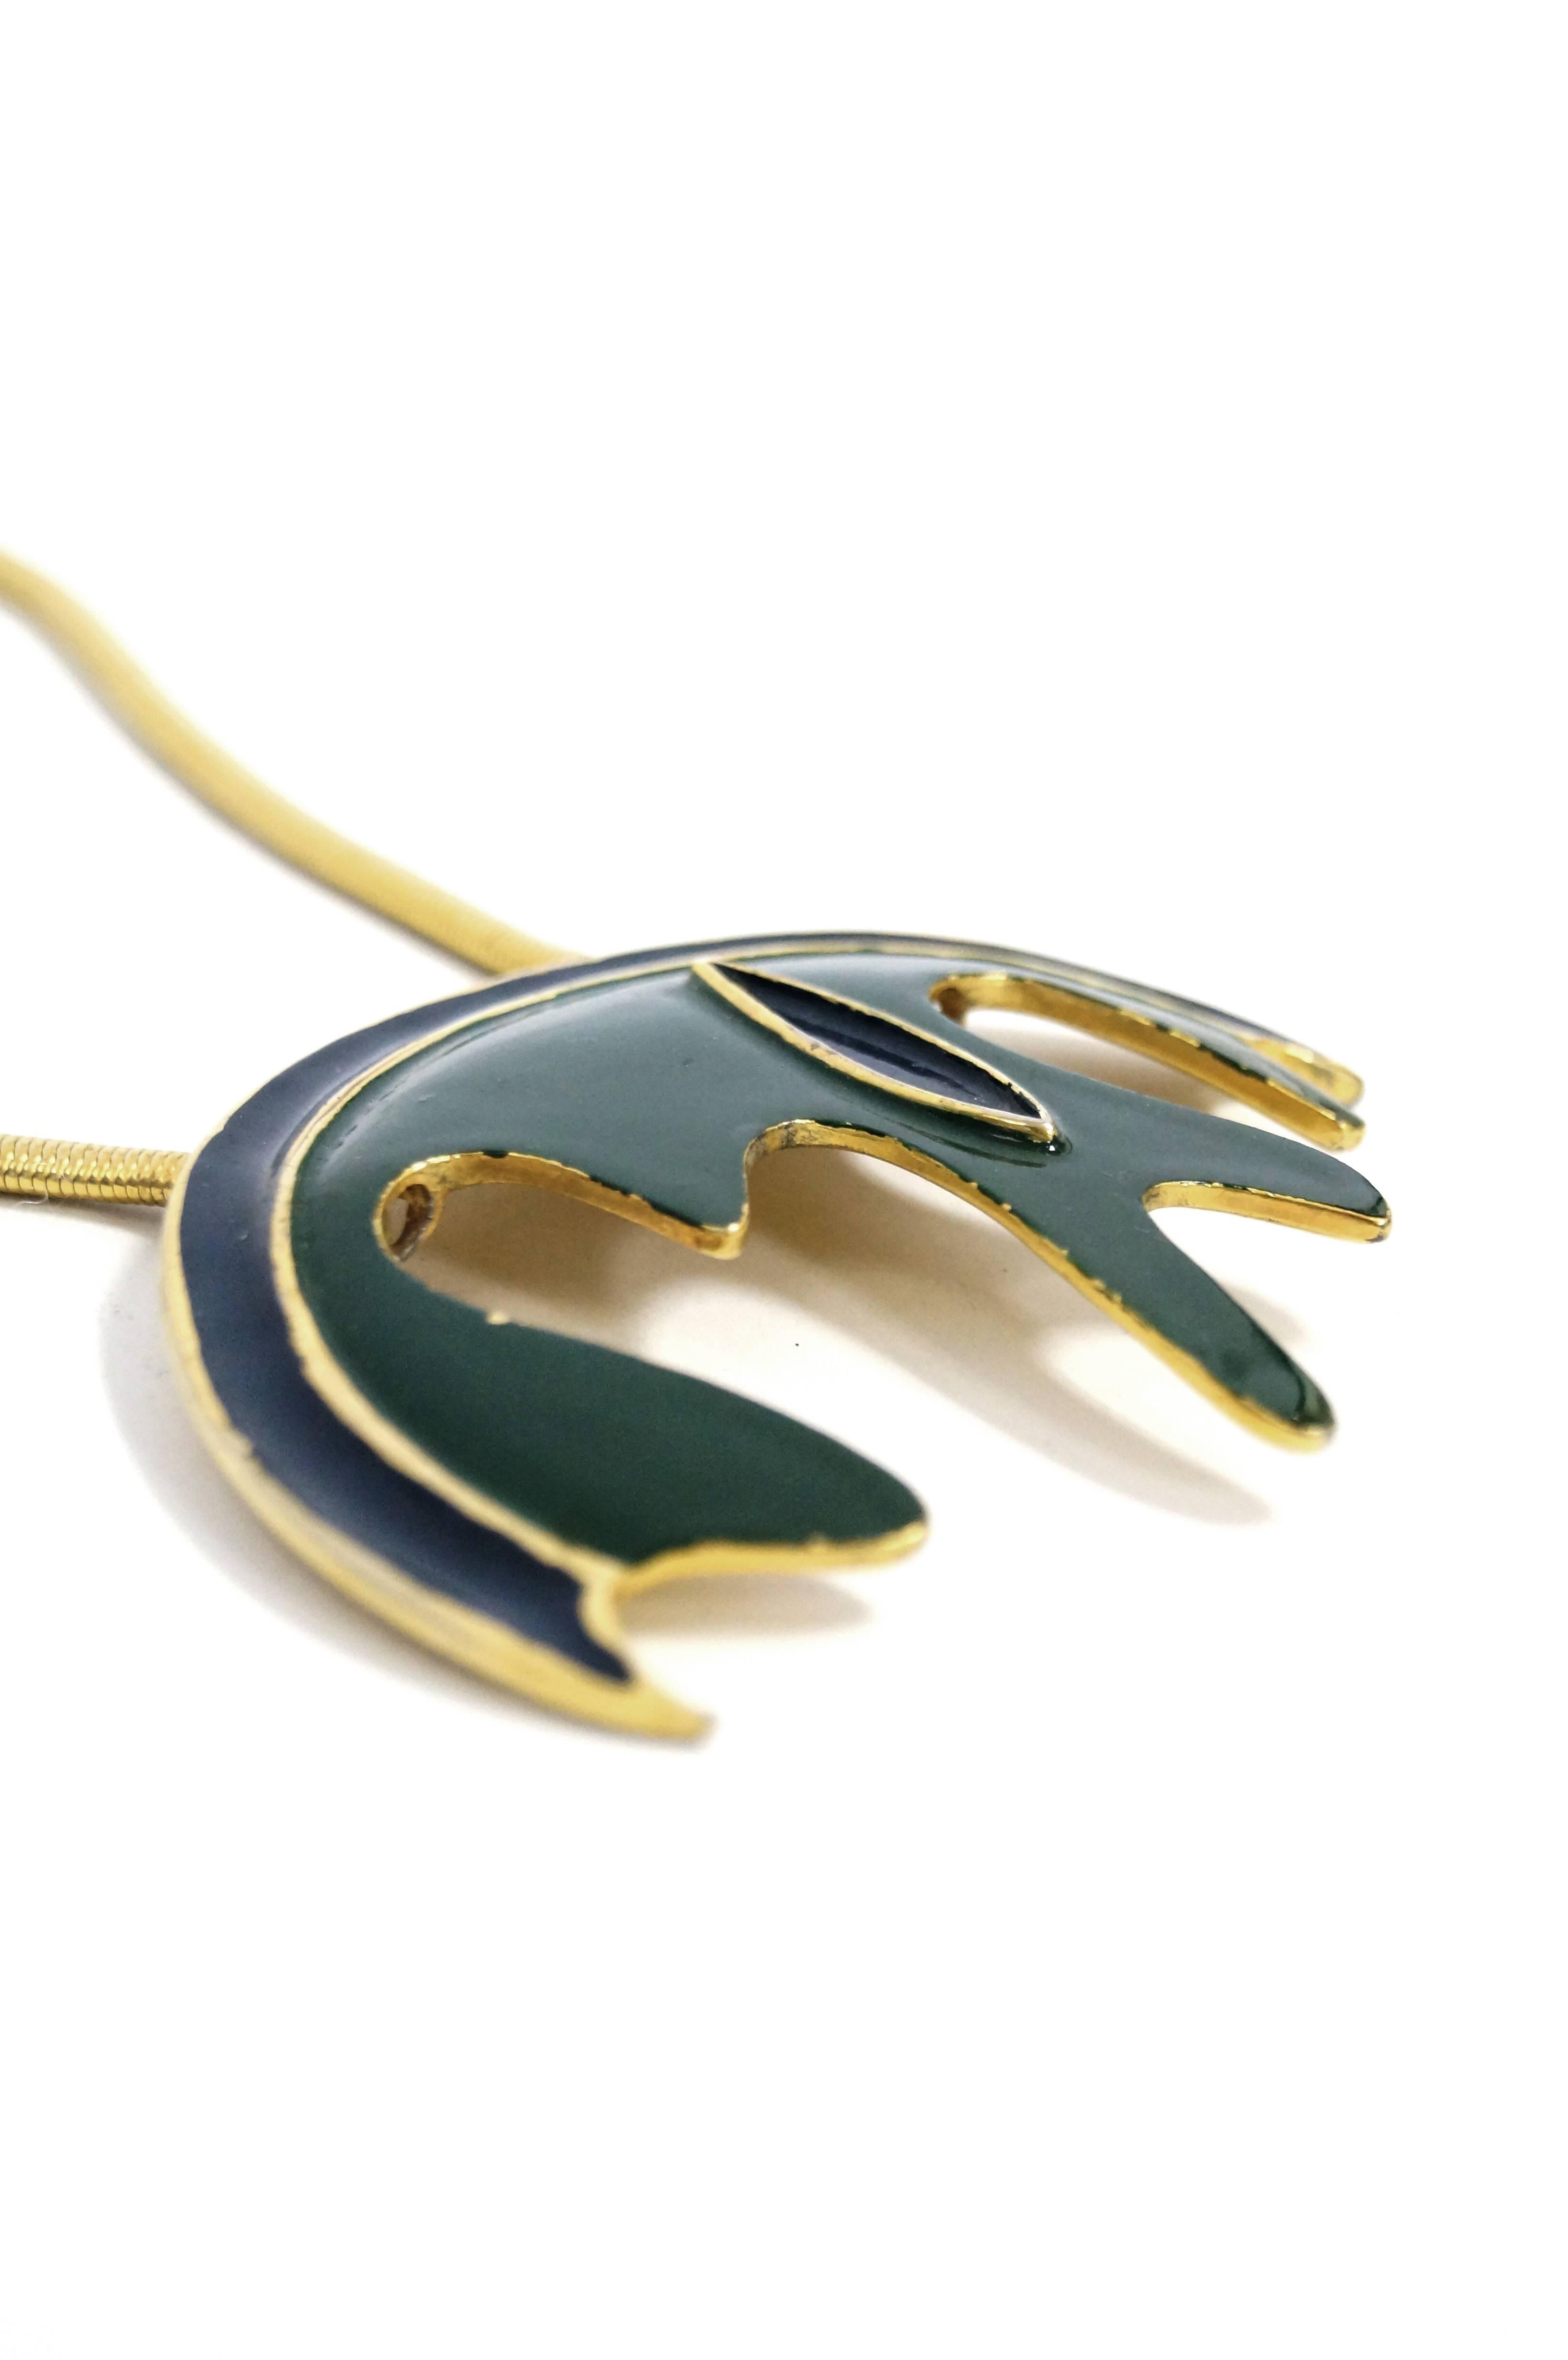 Pierre Cardin Blue and Green Enamel Massive Medallion Necklace, 1960s  In Excellent Condition For Sale In Houston, TX